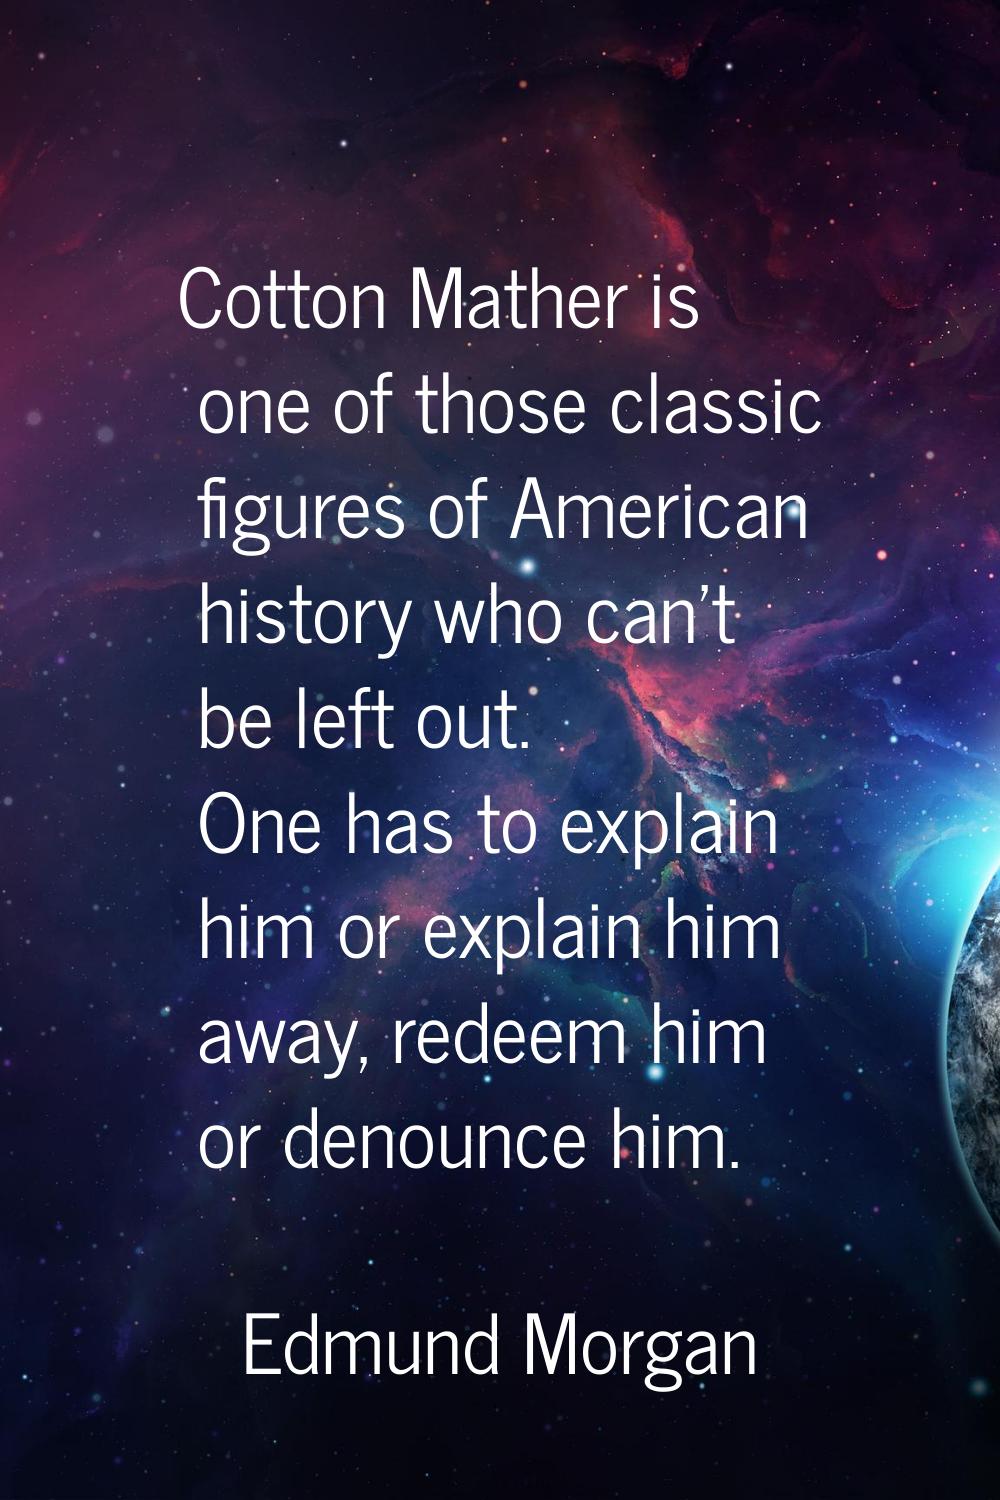 Cotton Mather is one of those classic figures of American history who can't be left out. One has to